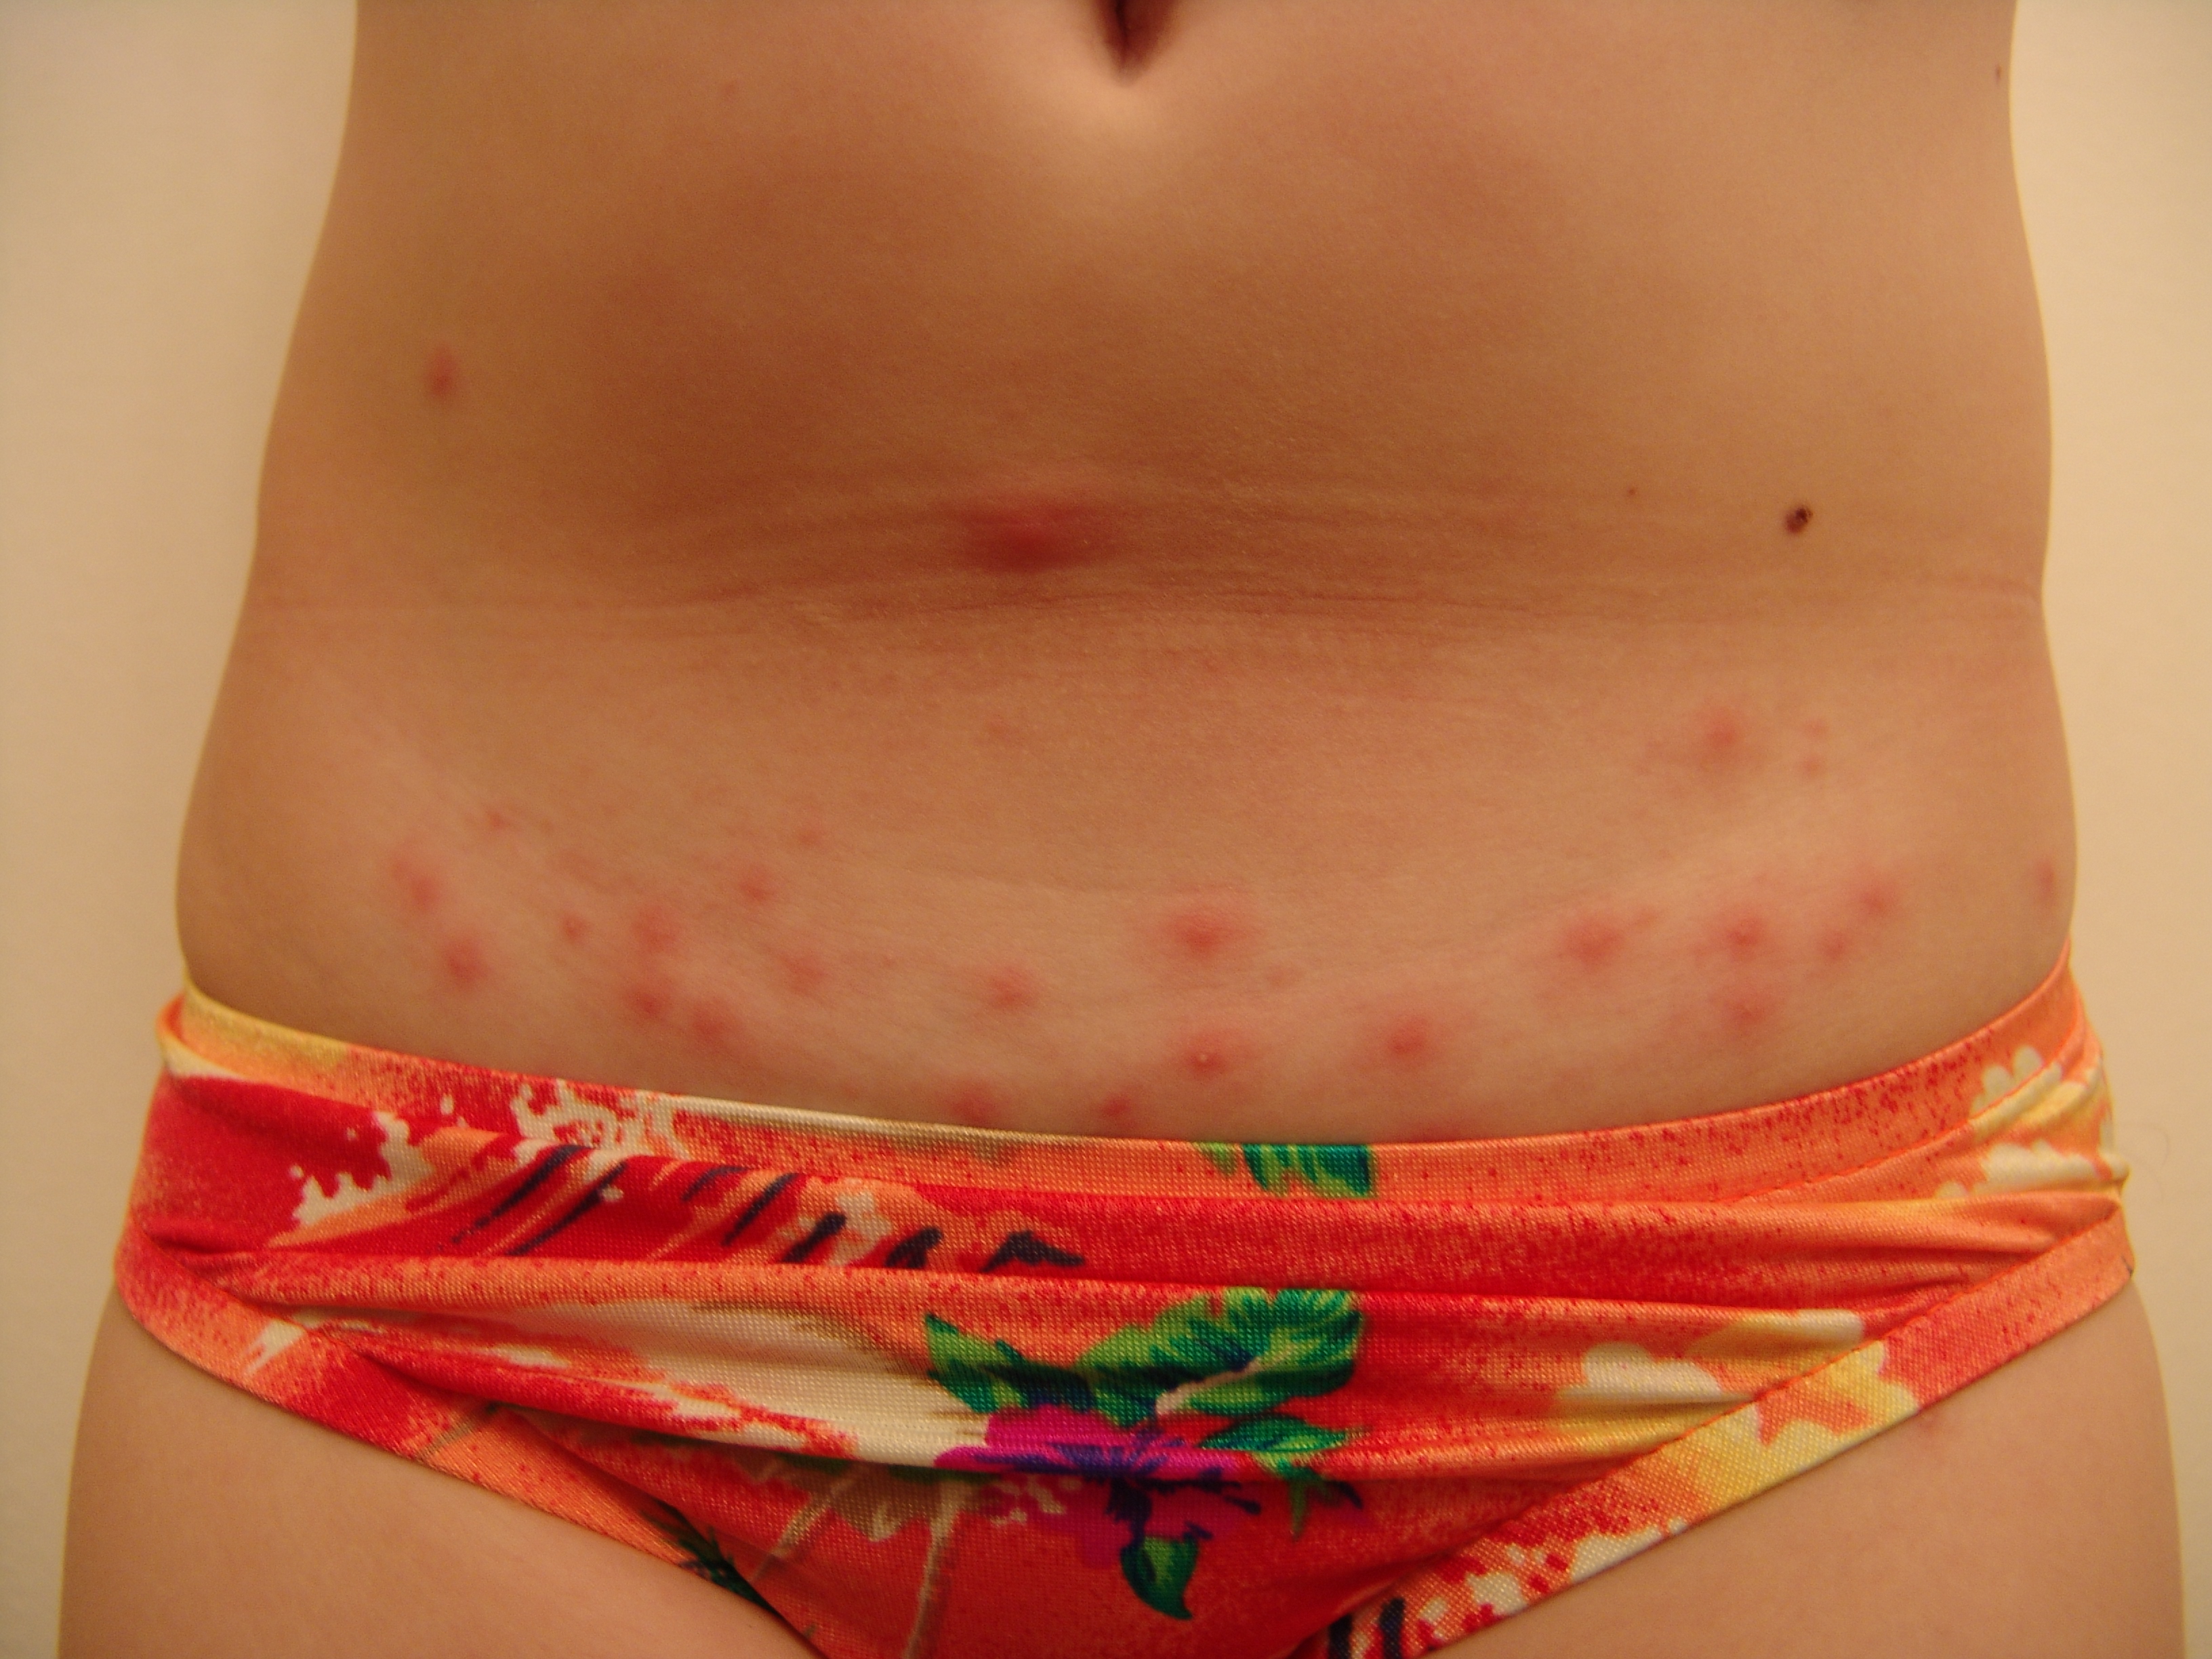 Young Girl With A Pruritic Rash